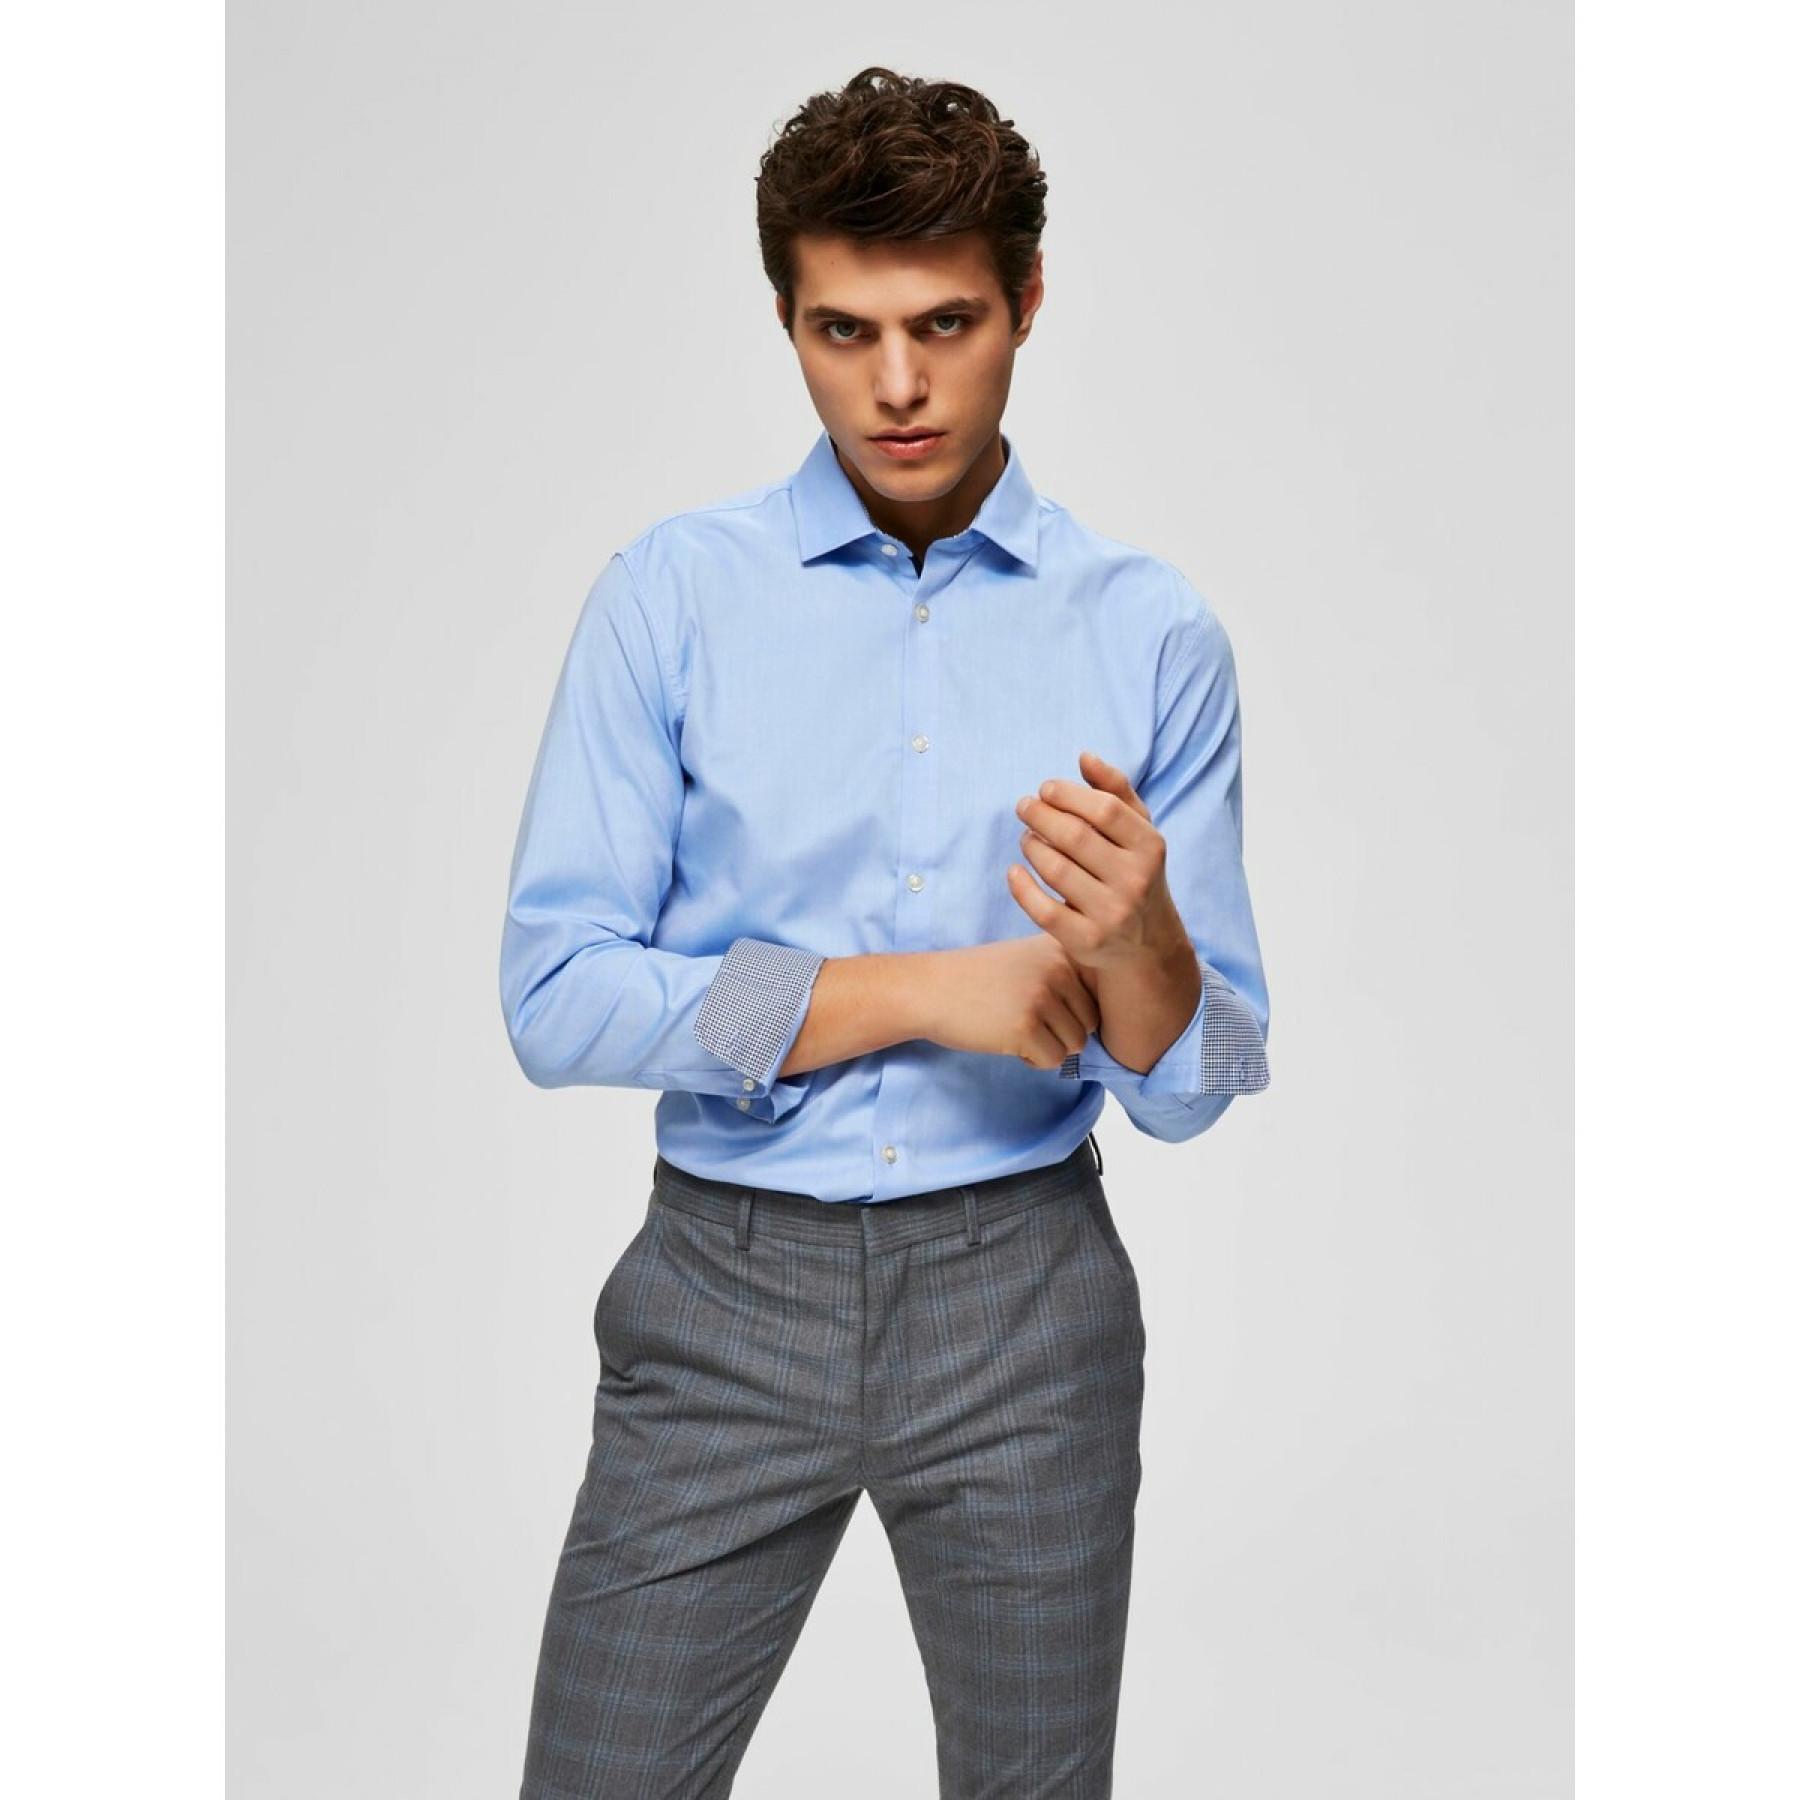 Chemise Selected New-mark manches longues slim